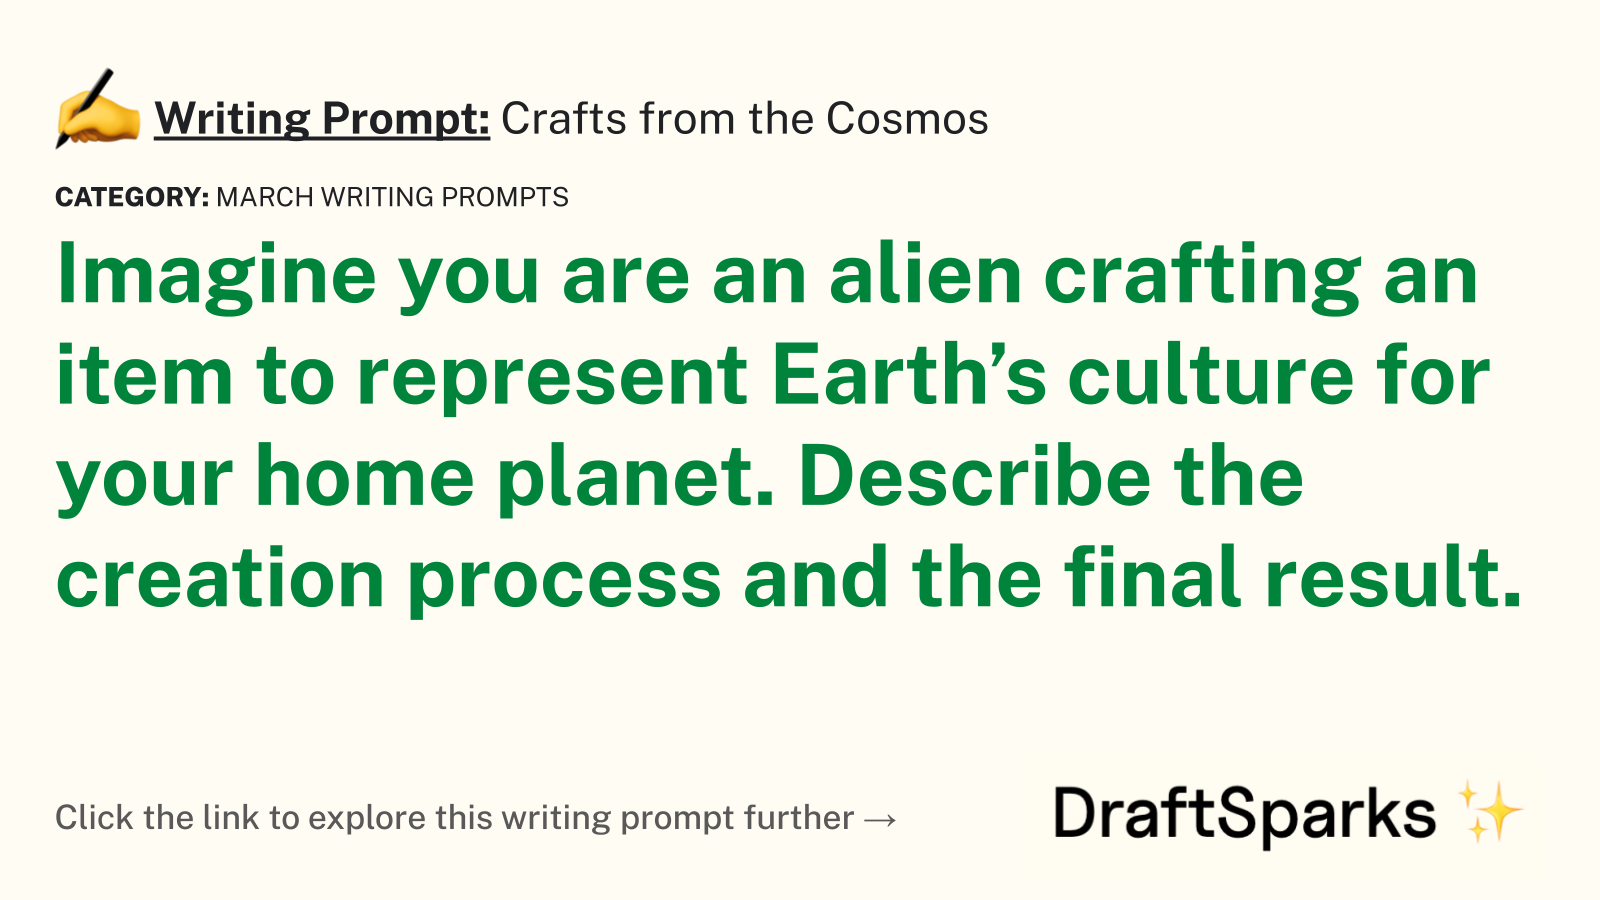 Crafts from the Cosmos